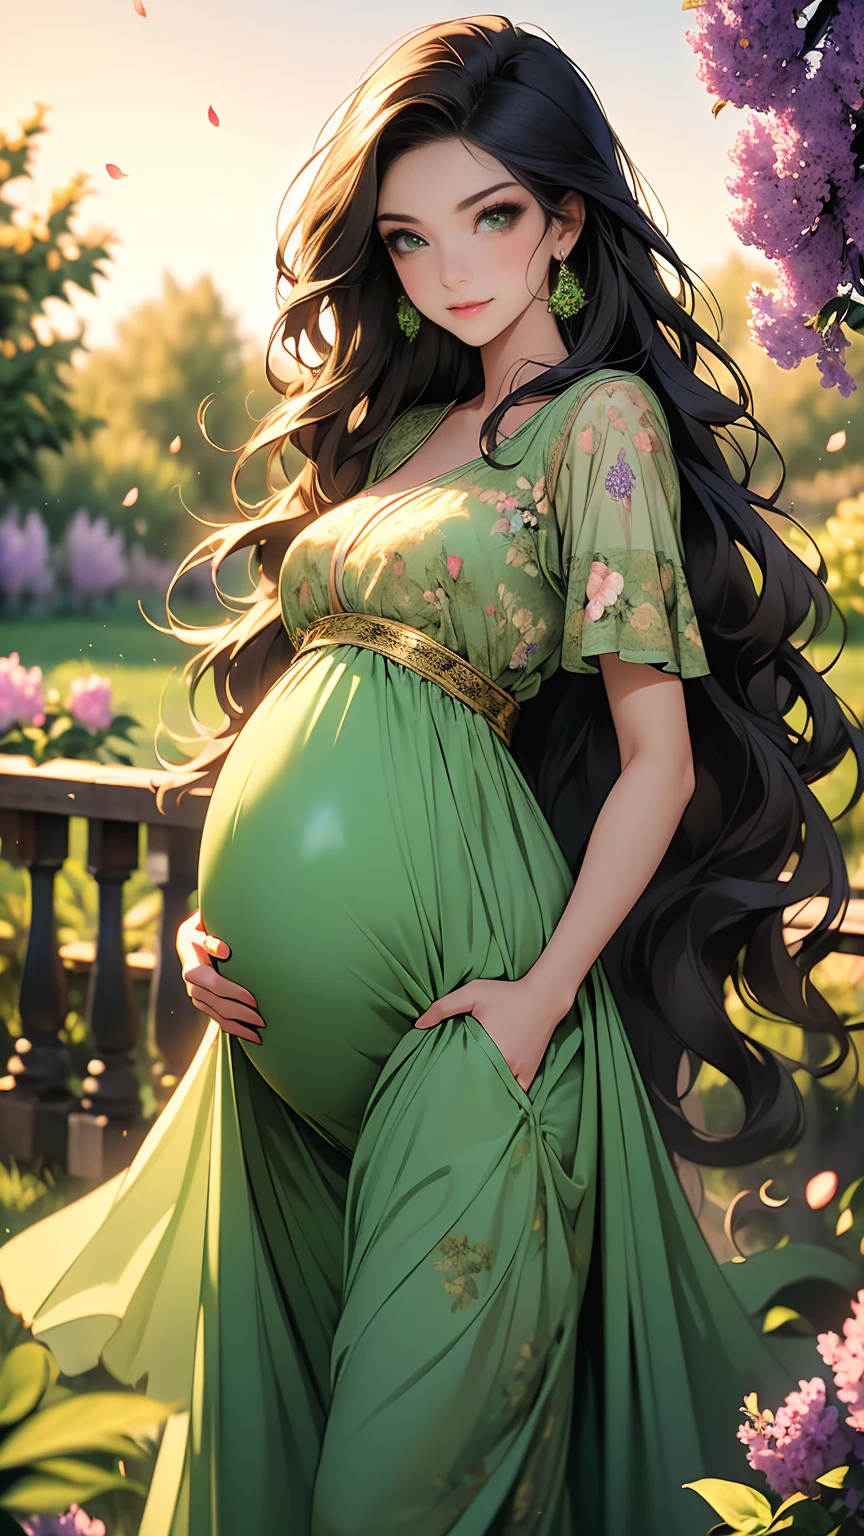 ((masterpiece, Best quality, a high resolution, ultra detailed),(Beautiful and aesthetically pleasing:1.2), detailed eyes and face, whole body, 1 woman, adult, (black long wavy hair), ((green eyes)), female body, Beautiful body, perfect body, flirtatious smile, ardent look, soft color maternity jumpsuit with print, bare feet, A walk in the garden, flower garden, evening, golden hour, many colors, apple trees bloom, Lilacs are blooming, pregnancy, small belly